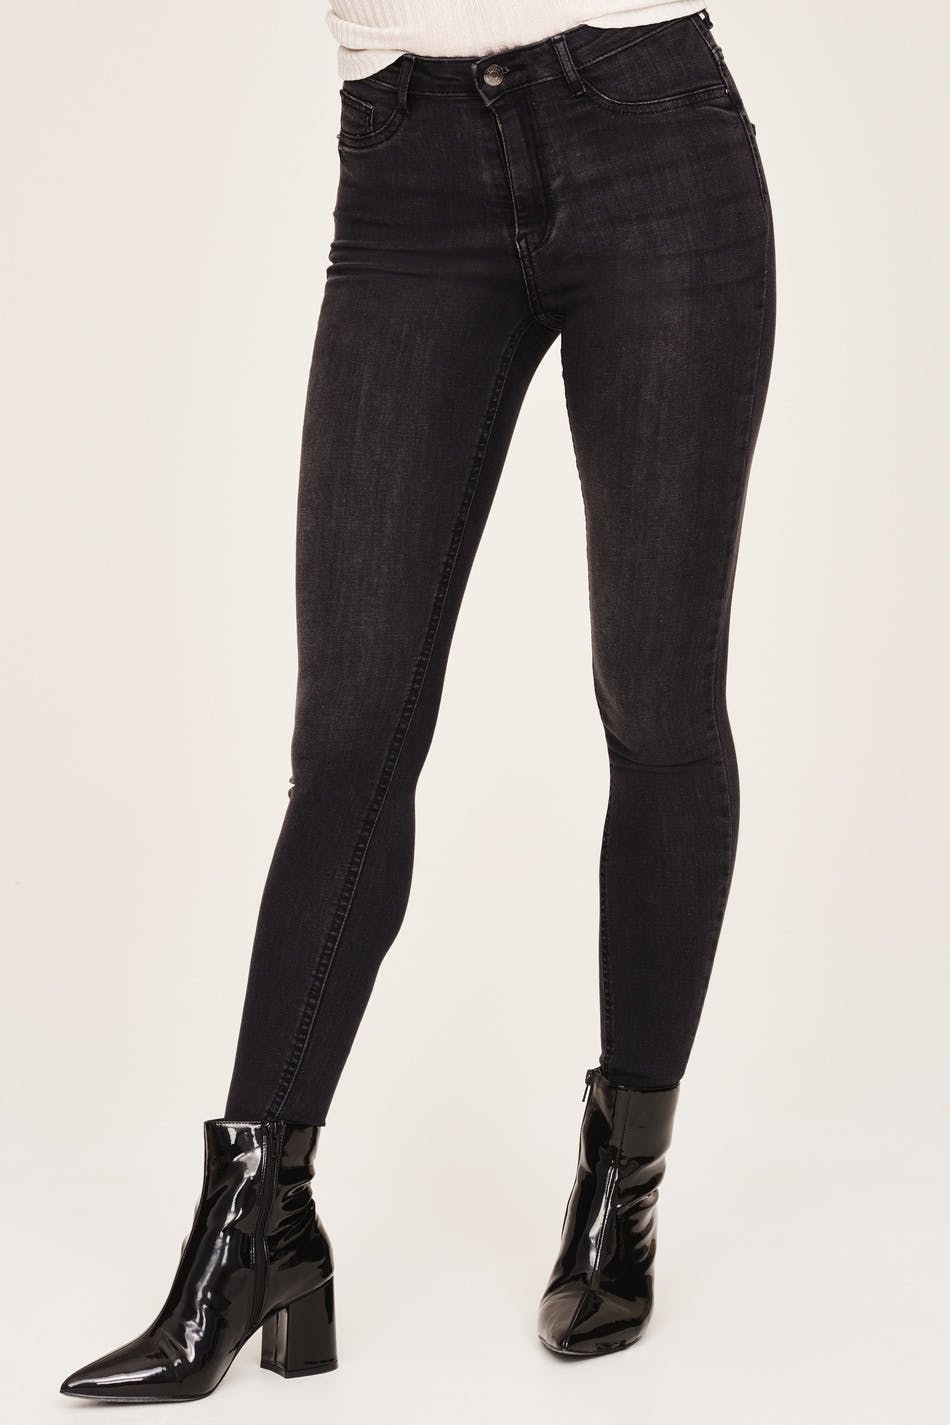 gina tricot molly perfect jeans